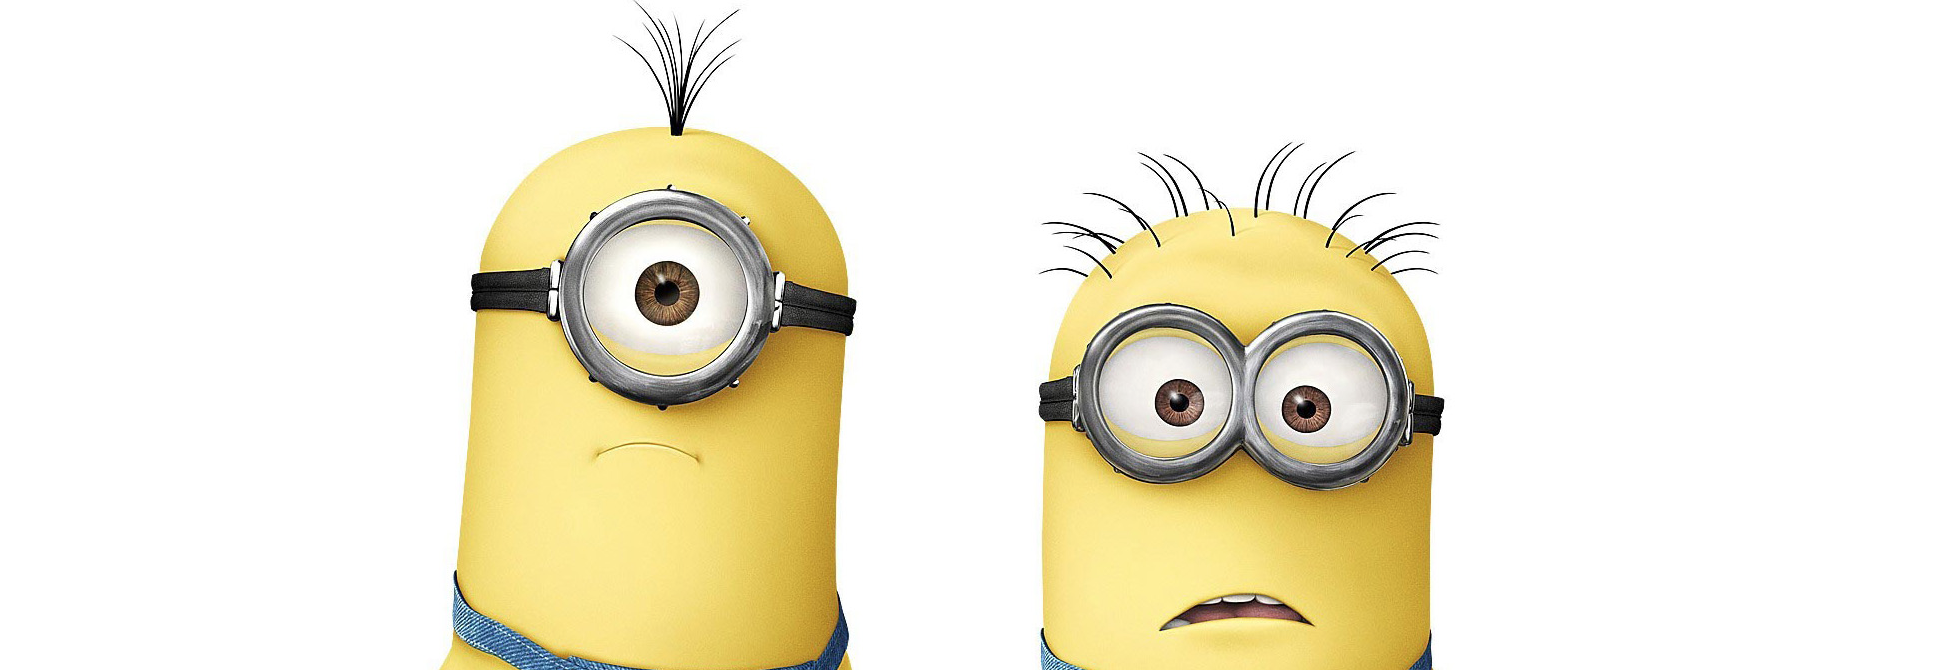 Despicable Me 2 Release Stopped in China